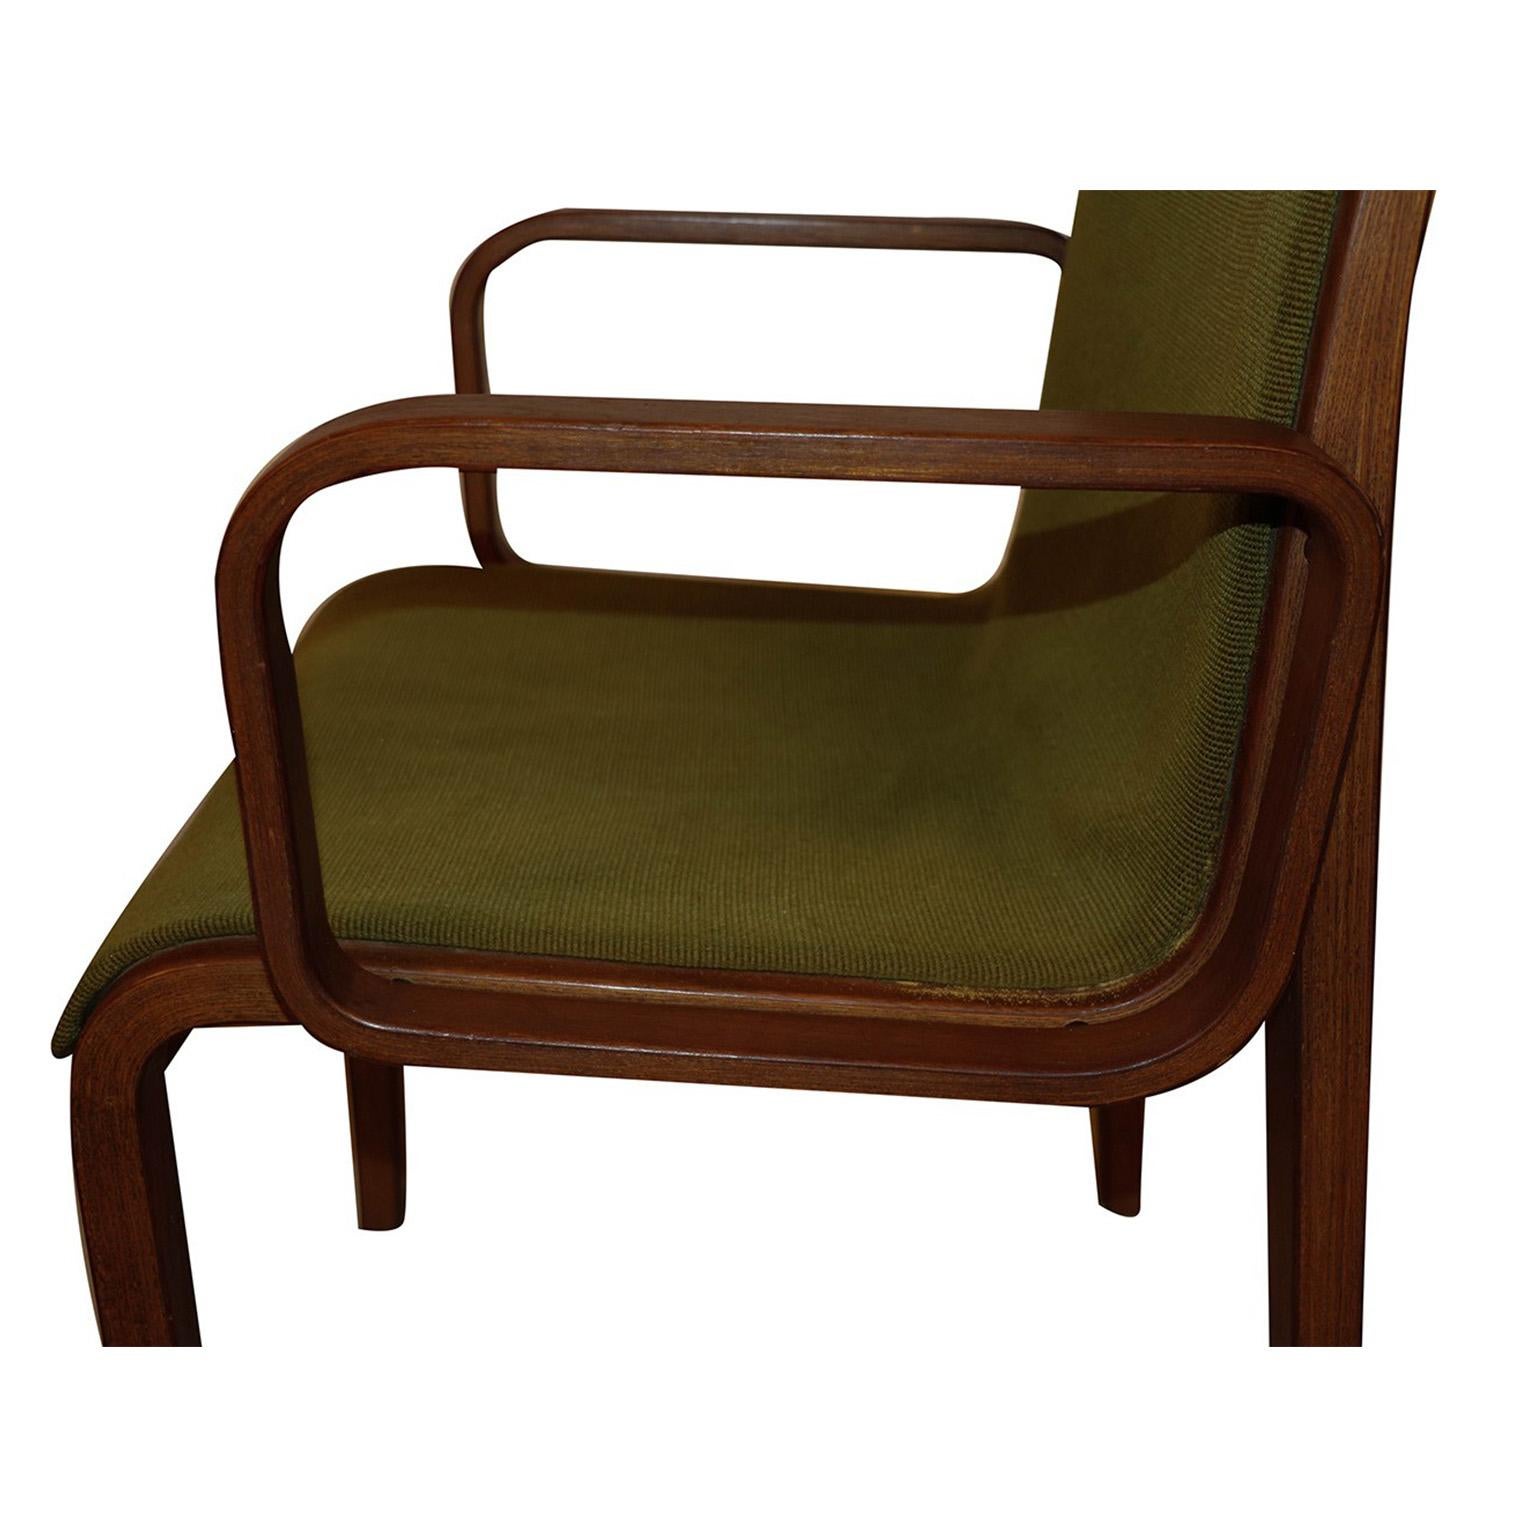 Upholstery Midcentury Bill Stephens Knoll Bentwood Chair